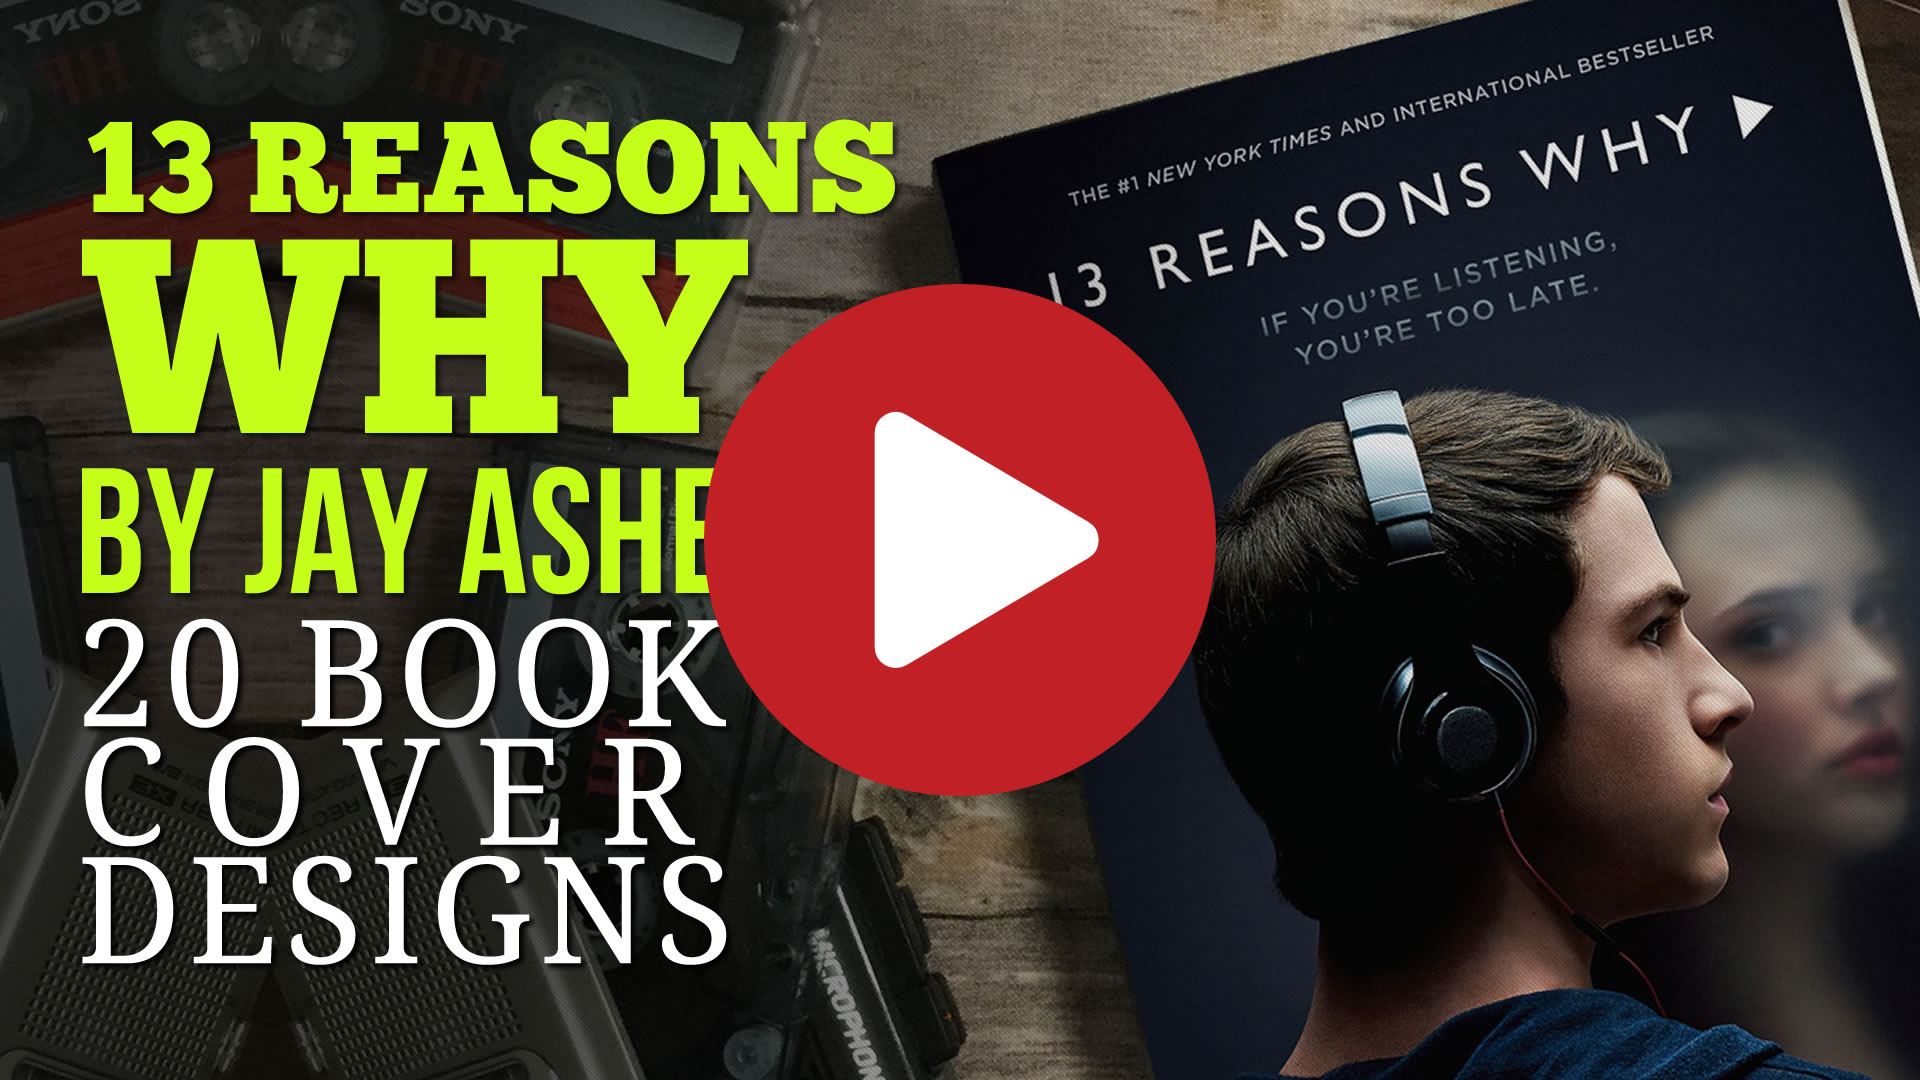 13 Reasons Why - 20 Book Cover Design Variations